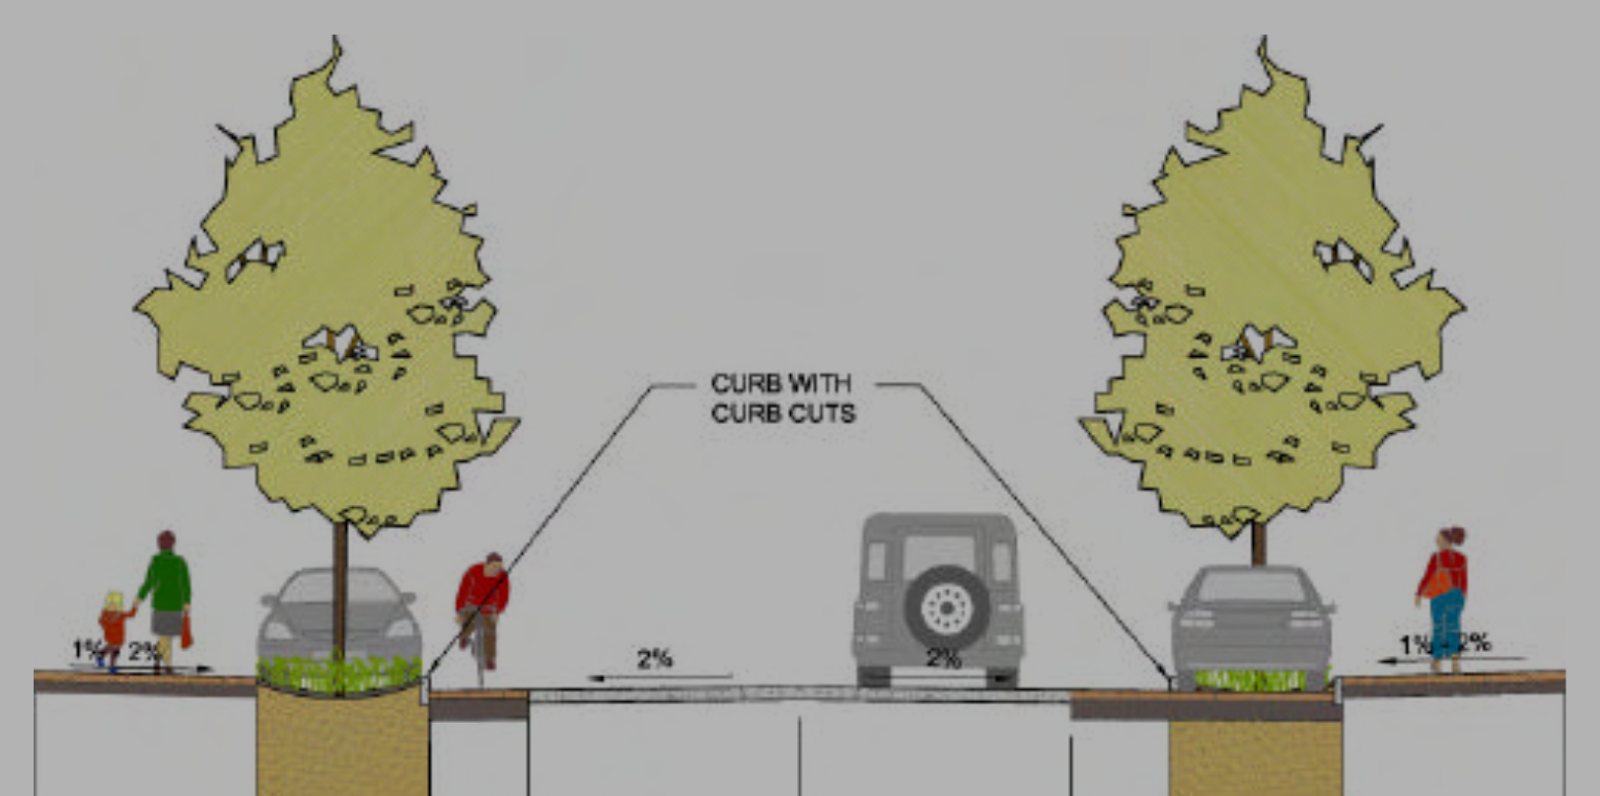 Diagram of two curb openings allowing stormwater to drain into street trees and infiltrate the soil.